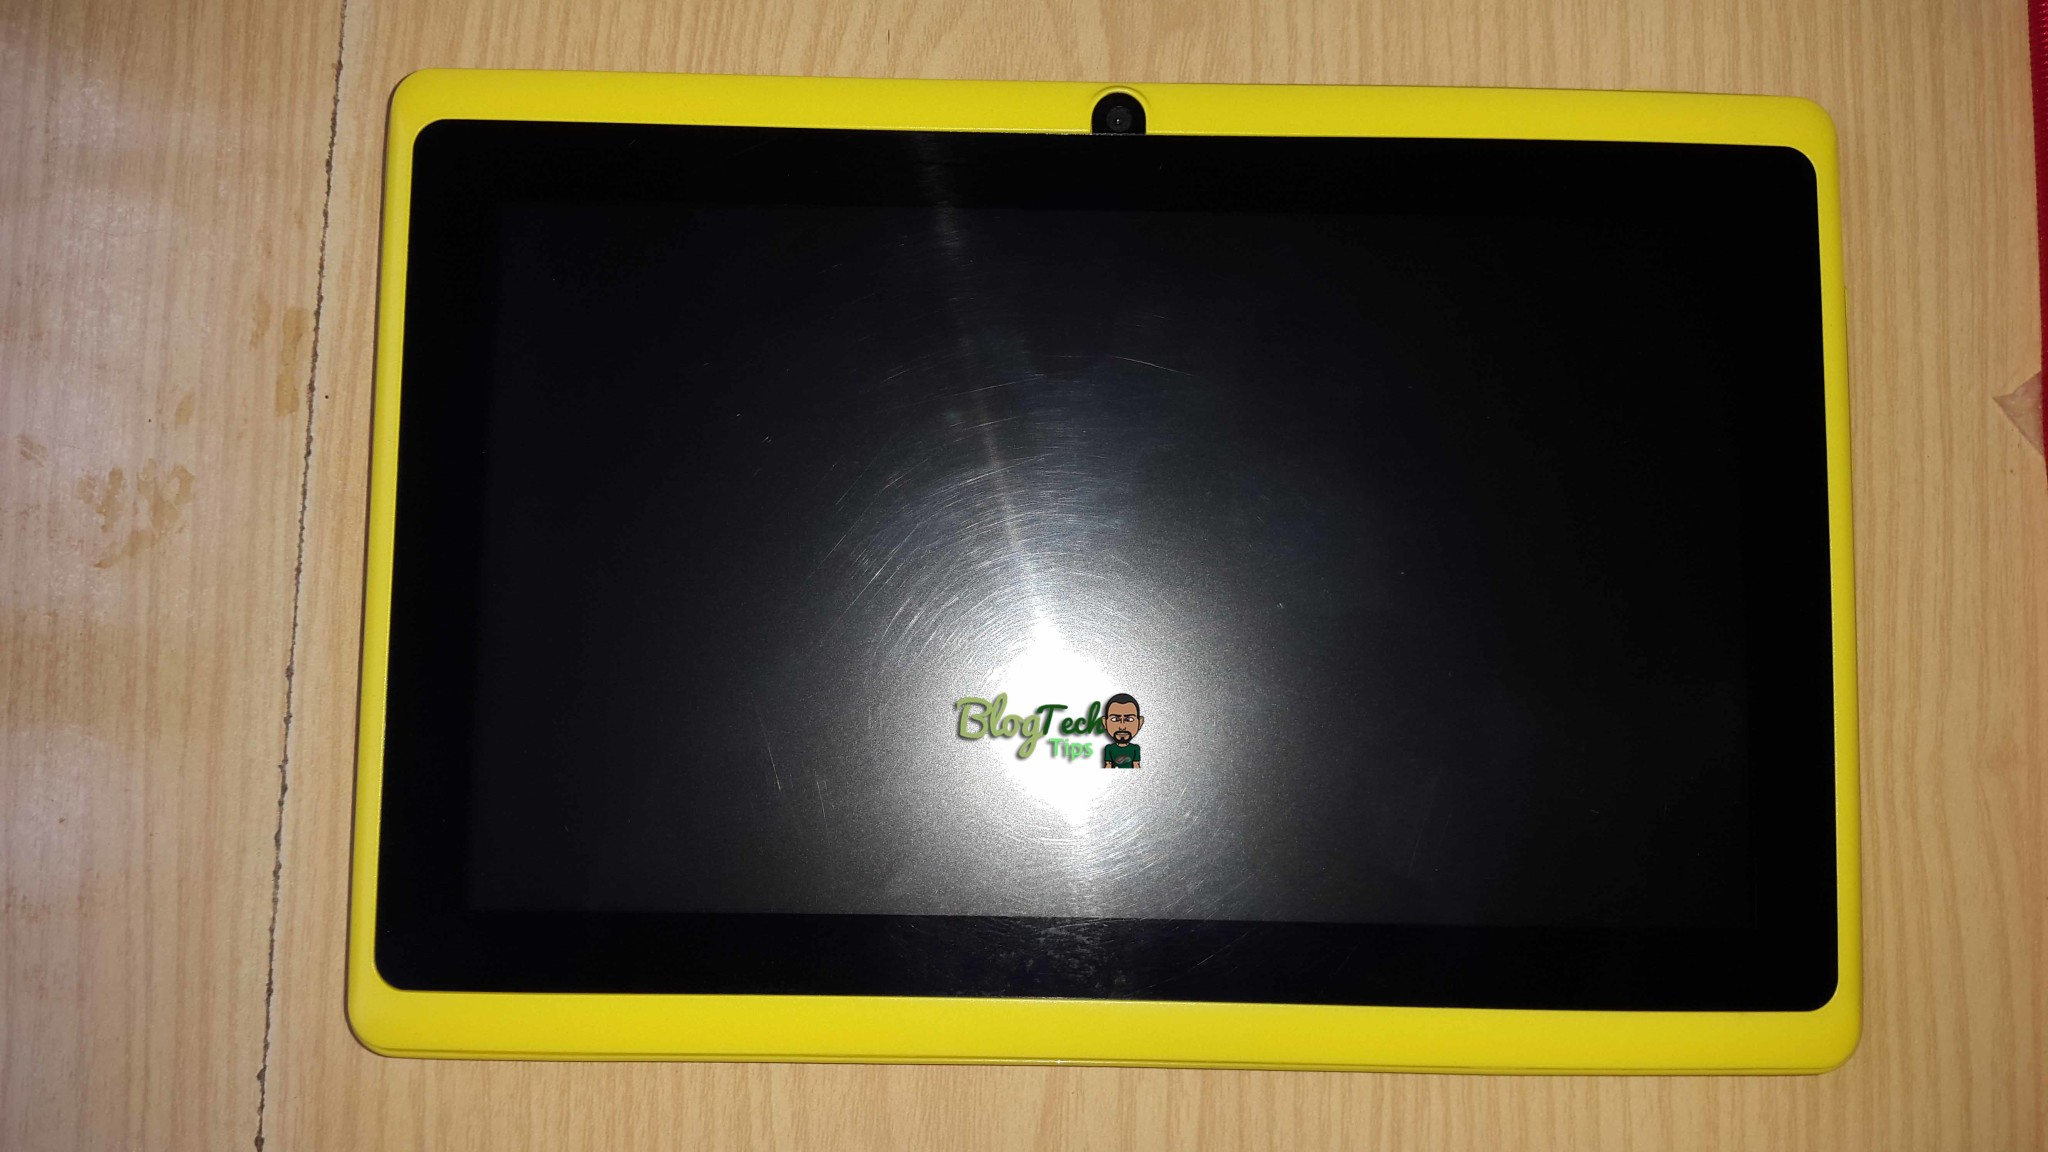 Chinese Tablet firmware